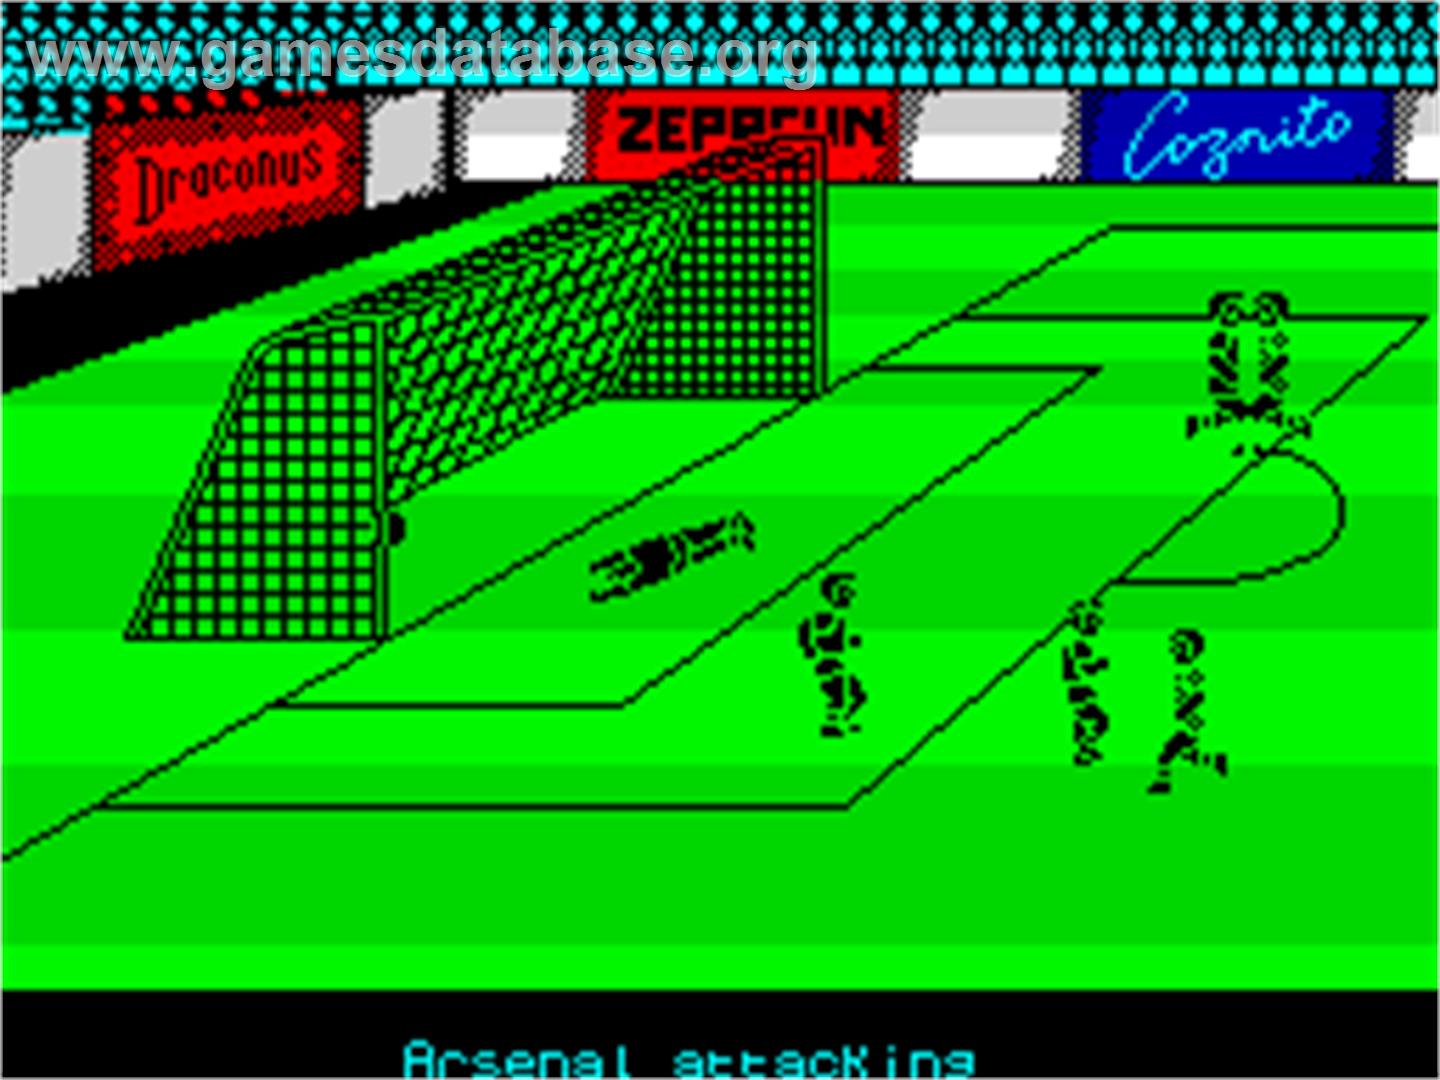 Kenny Dalglish Soccer Manager - Sinclair ZX Spectrum - Artwork - In Game